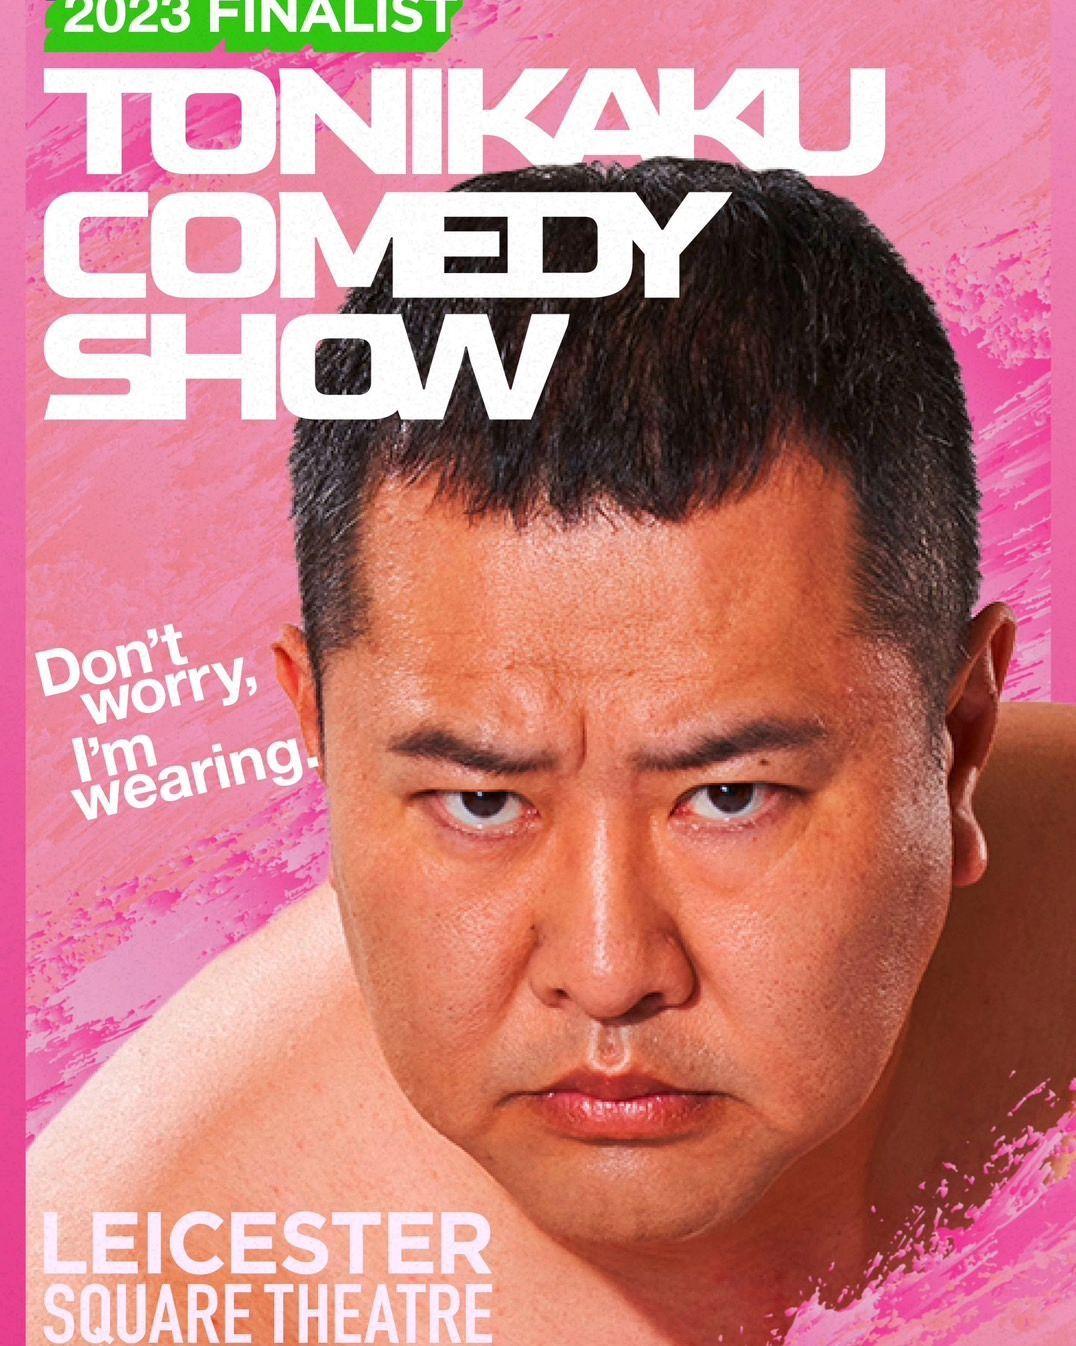 TONIKAKU COMEDY SHOW will be held at Leicester Square Theatre on July 12th! The show starts at 9-30 pm and will feature special guests Koikuchi Ichikawa and Wes-P, wh